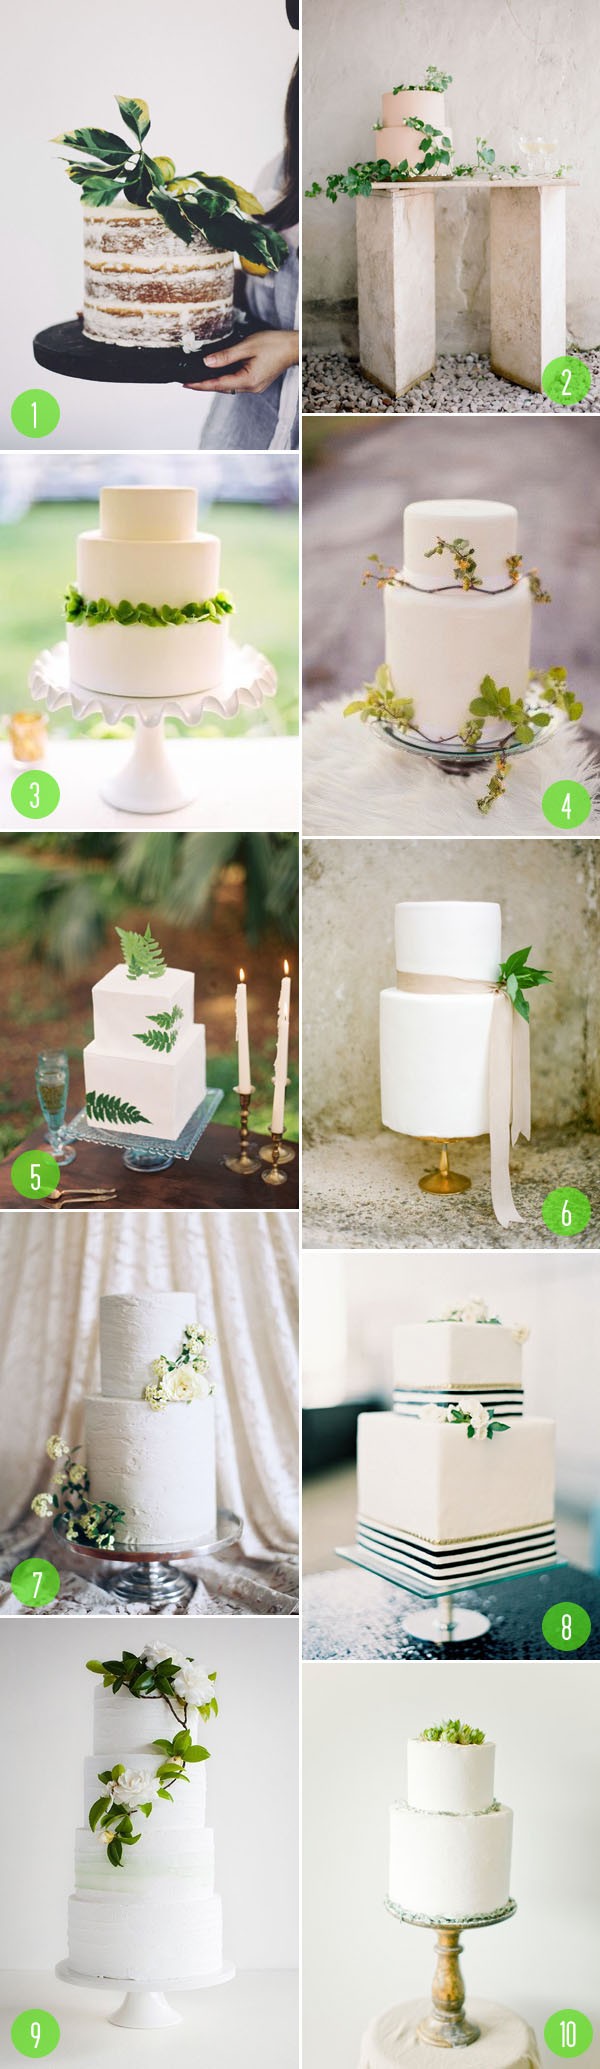 top 10: cakes with greenery